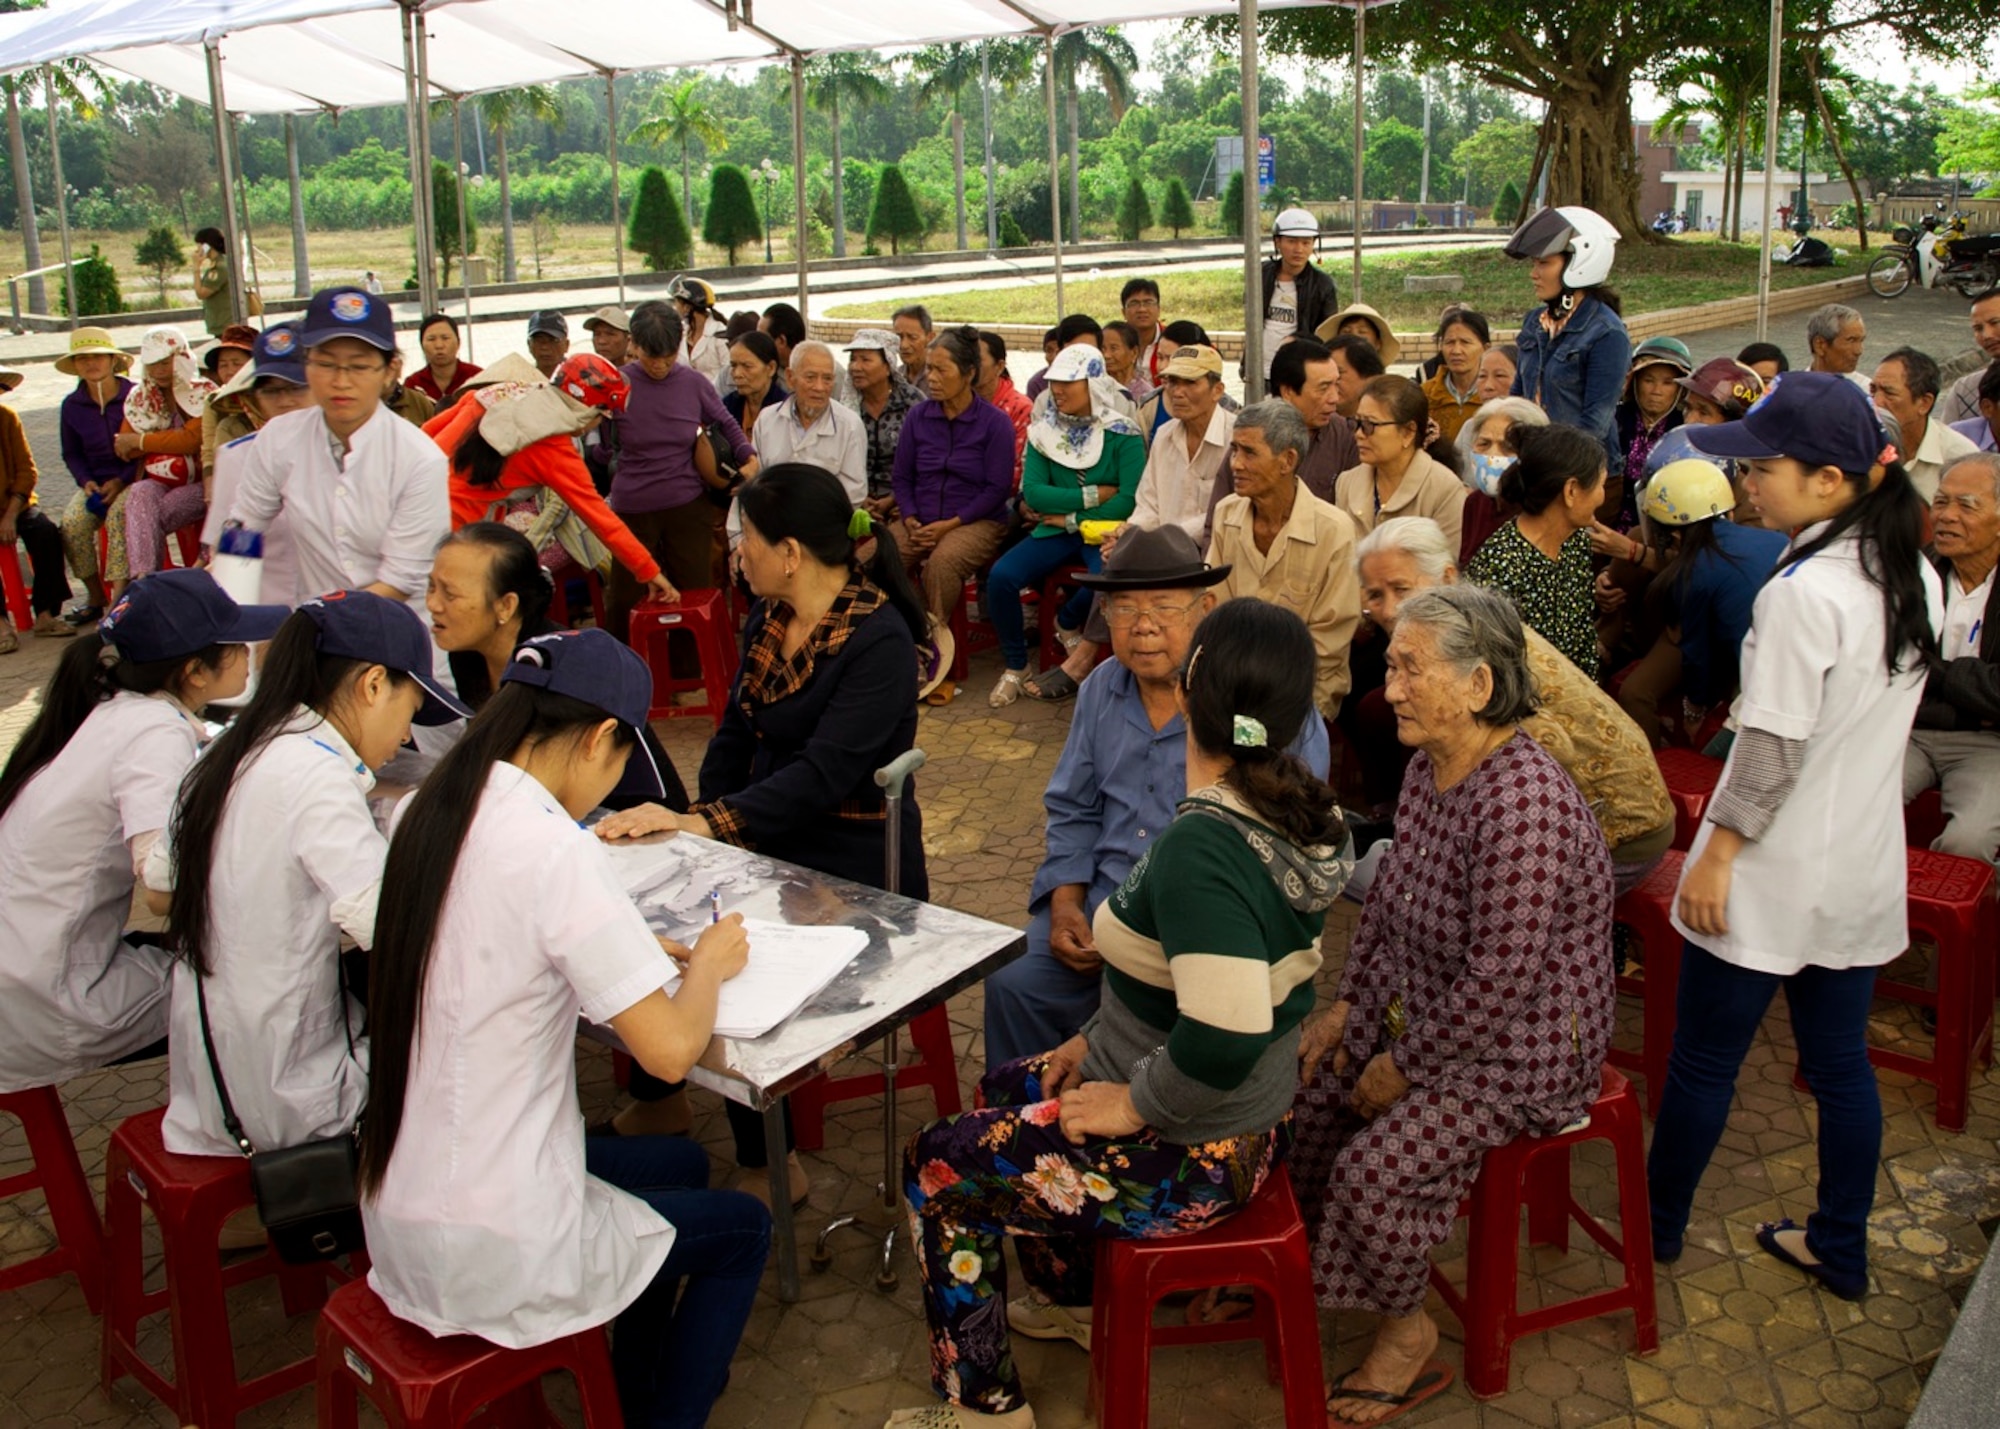 Vietnamese medical patient handlers register locals from Quang Ngai Province during a Operation Pacific Angel 15-3 health services outreach event at Dung Quat Culture - Sports Center, Quang Ngai Province, Vietnam, March 23, 2015. Operation PACANGEL is a total force, joint and combined humanitarian assistance operation led by the U.S. Pacific Air Forces. The operation promotes interoperability amongst U.S. military, host nation and multilateral military and civilian organizations. (U.S. Air Force photo by Staff Sgt. Tong Duong/ Released)